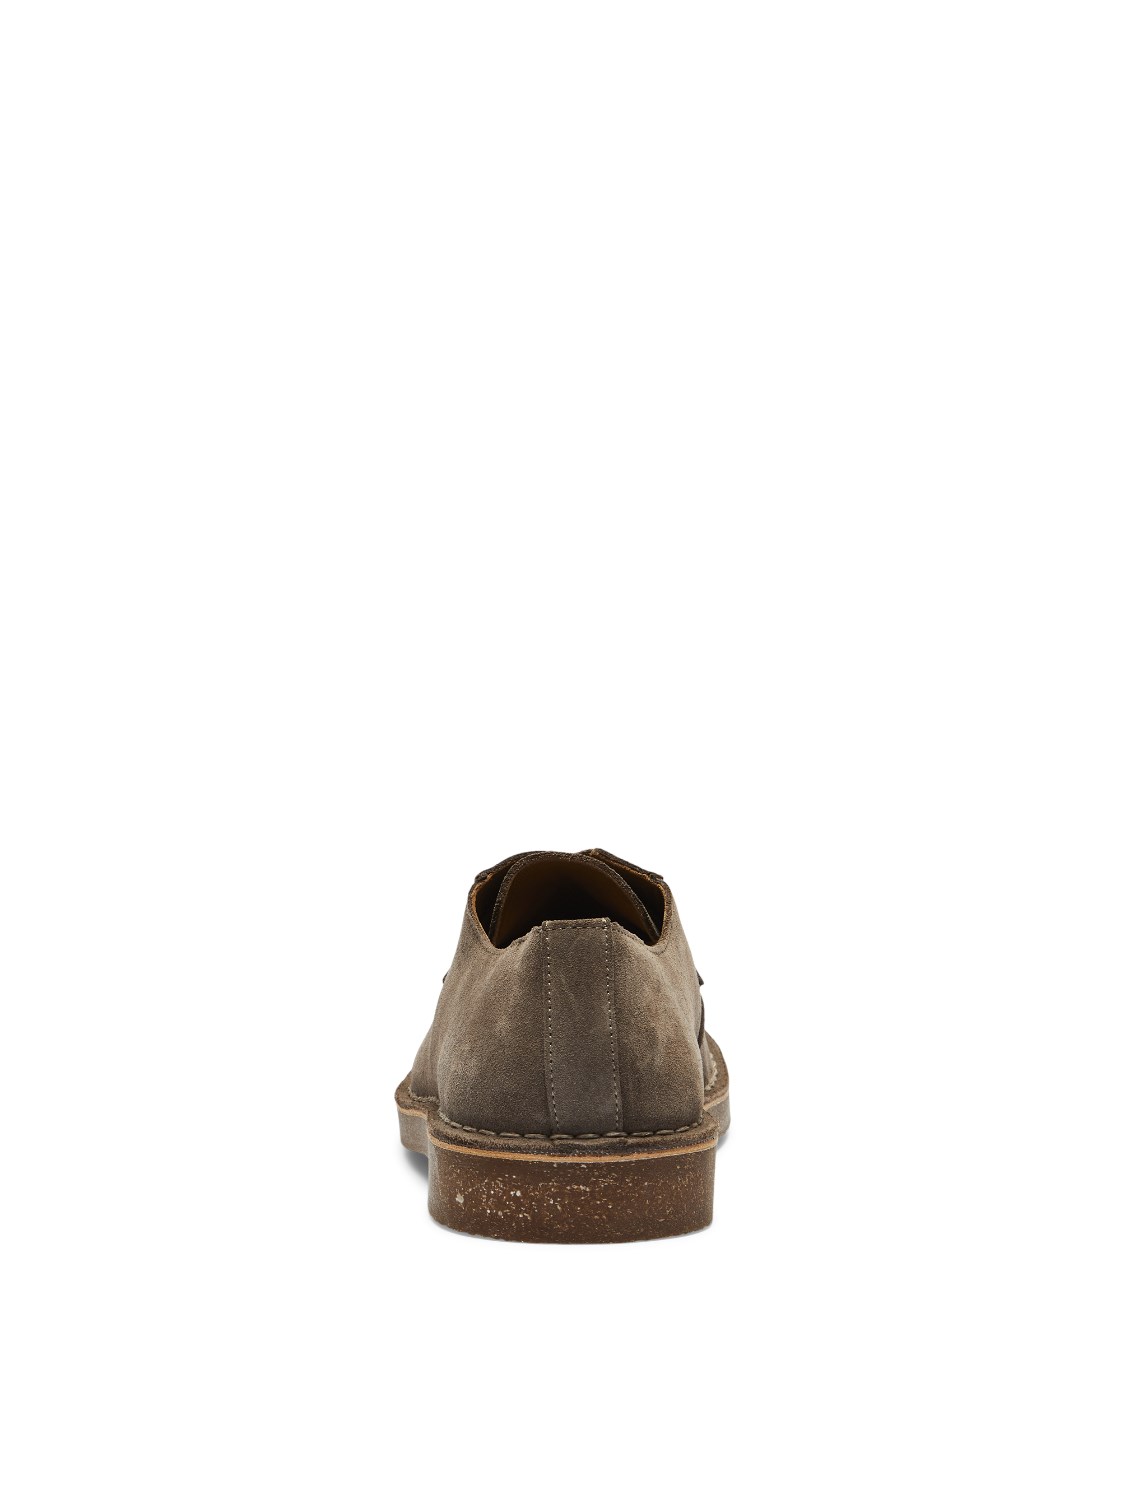 Selected Homme Riga Suede Blucher Shoe